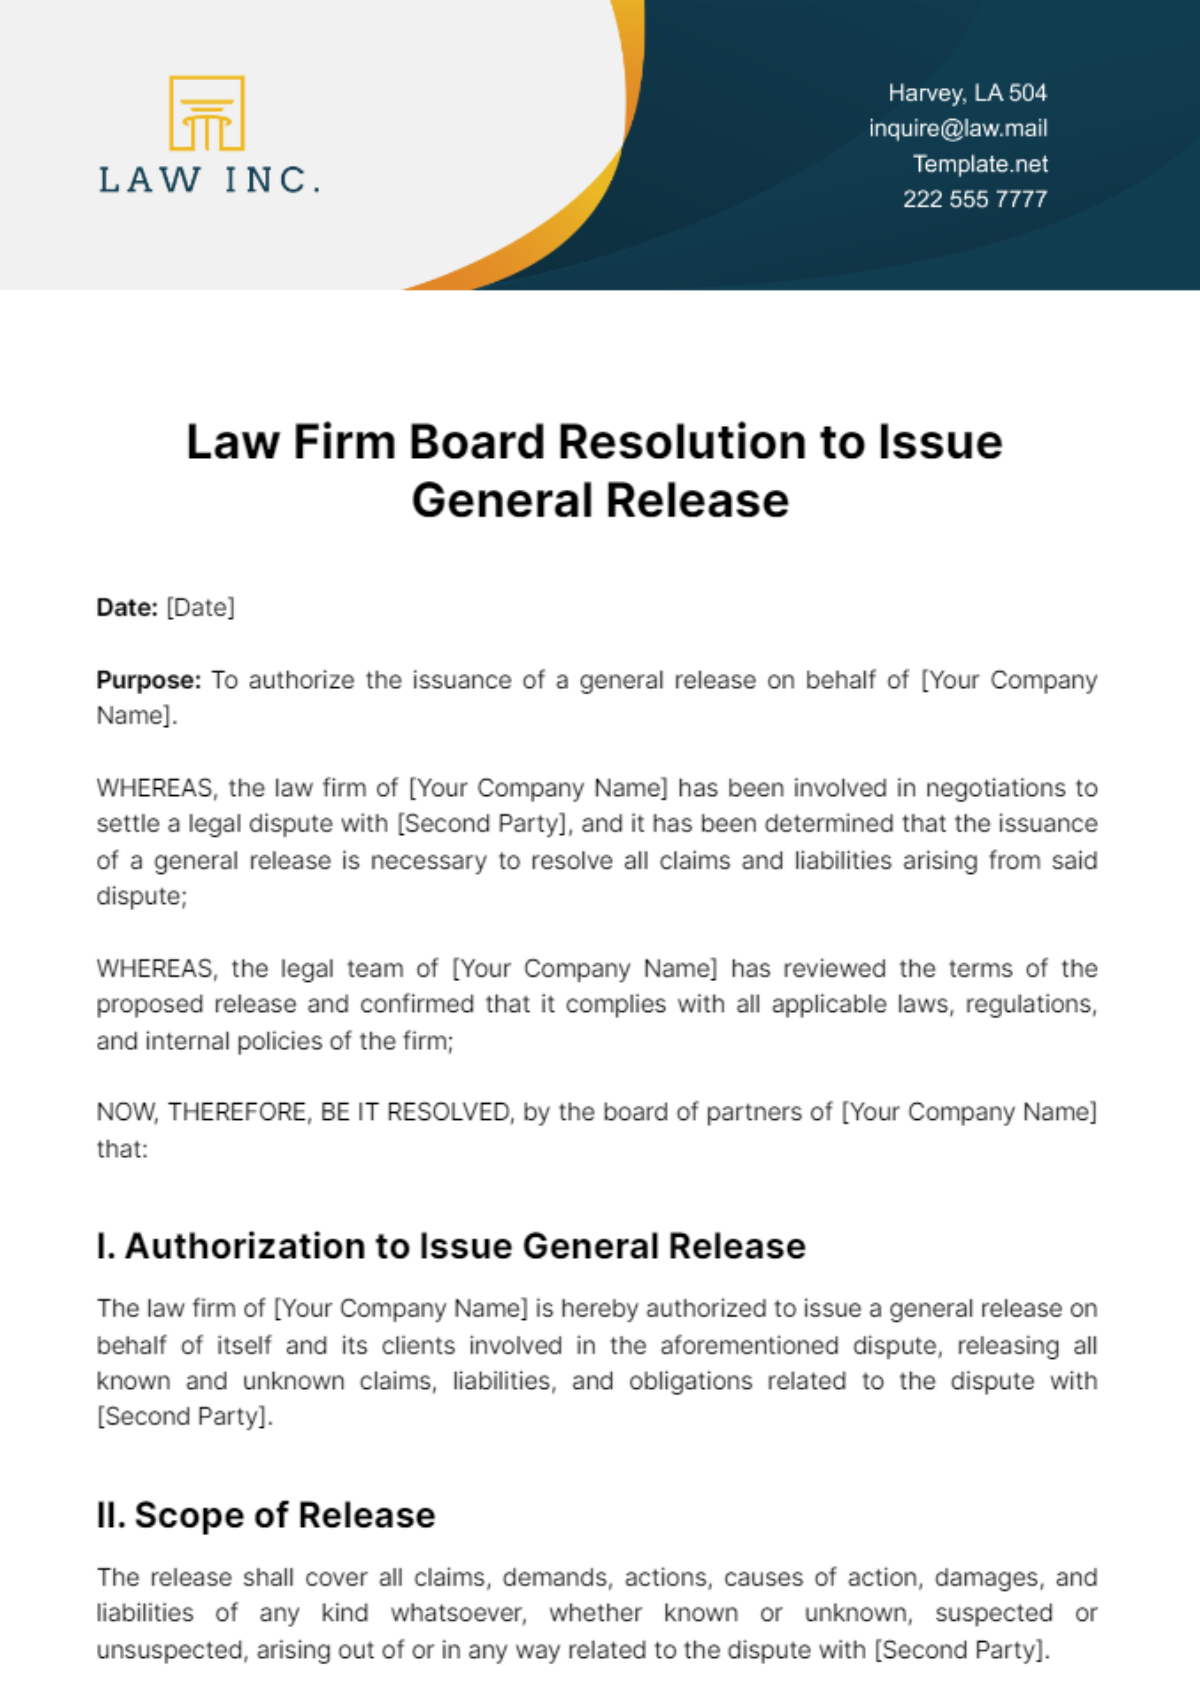 Law Firm Board Resolution to Issue General Release Template